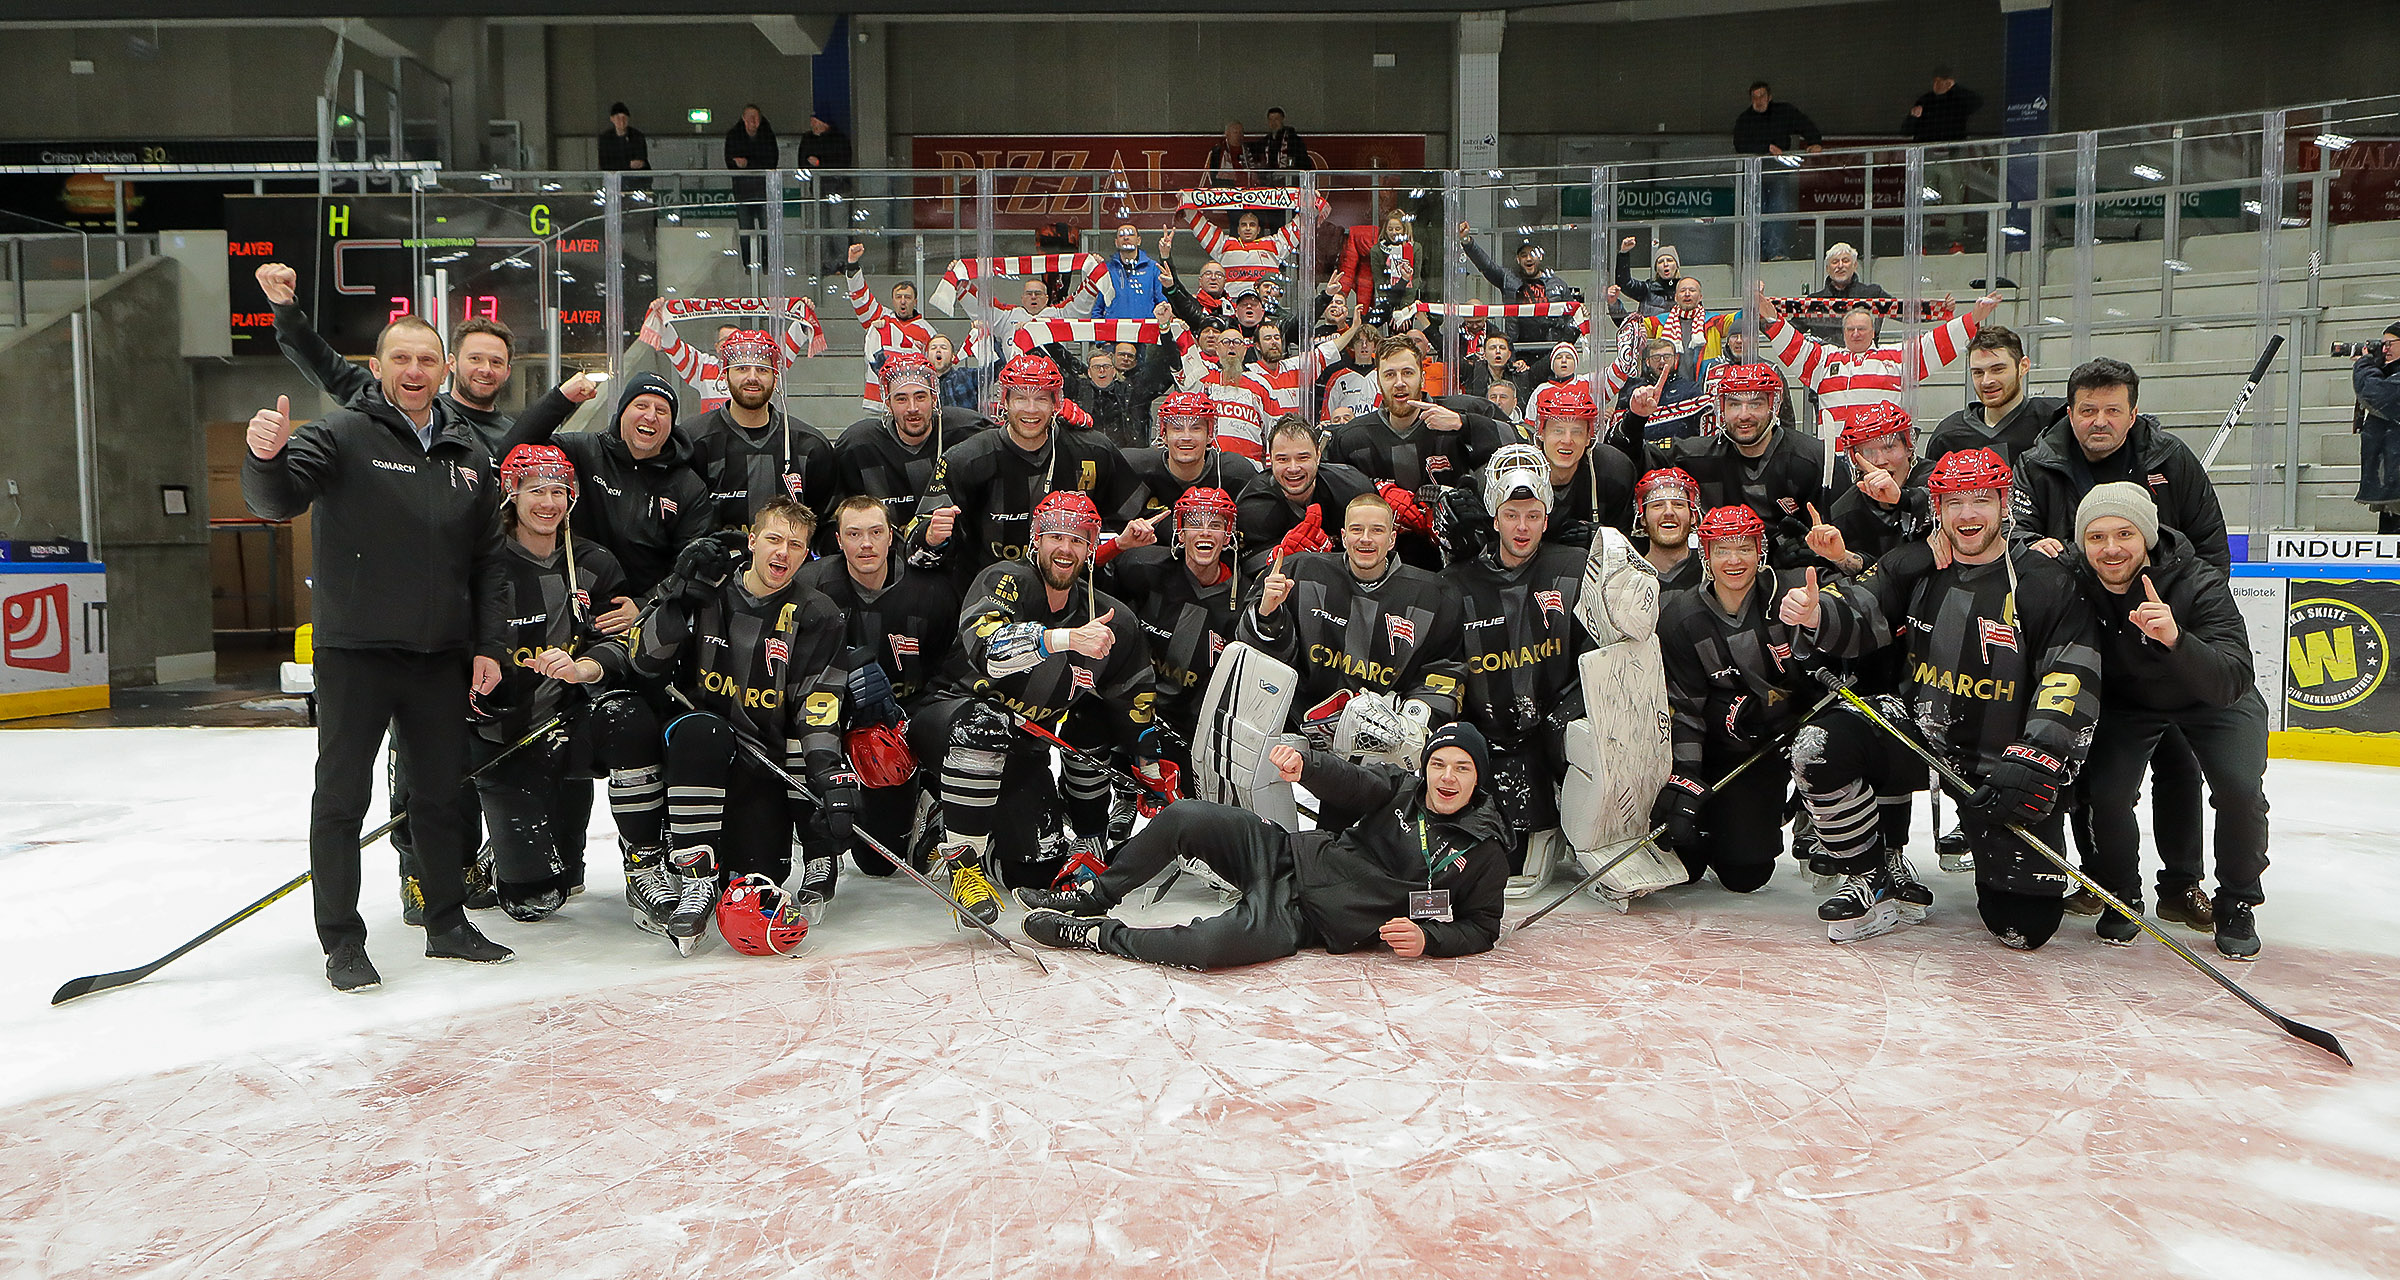 Comarch Cracovia won with Aalborg Pirates. The Cup is ours!